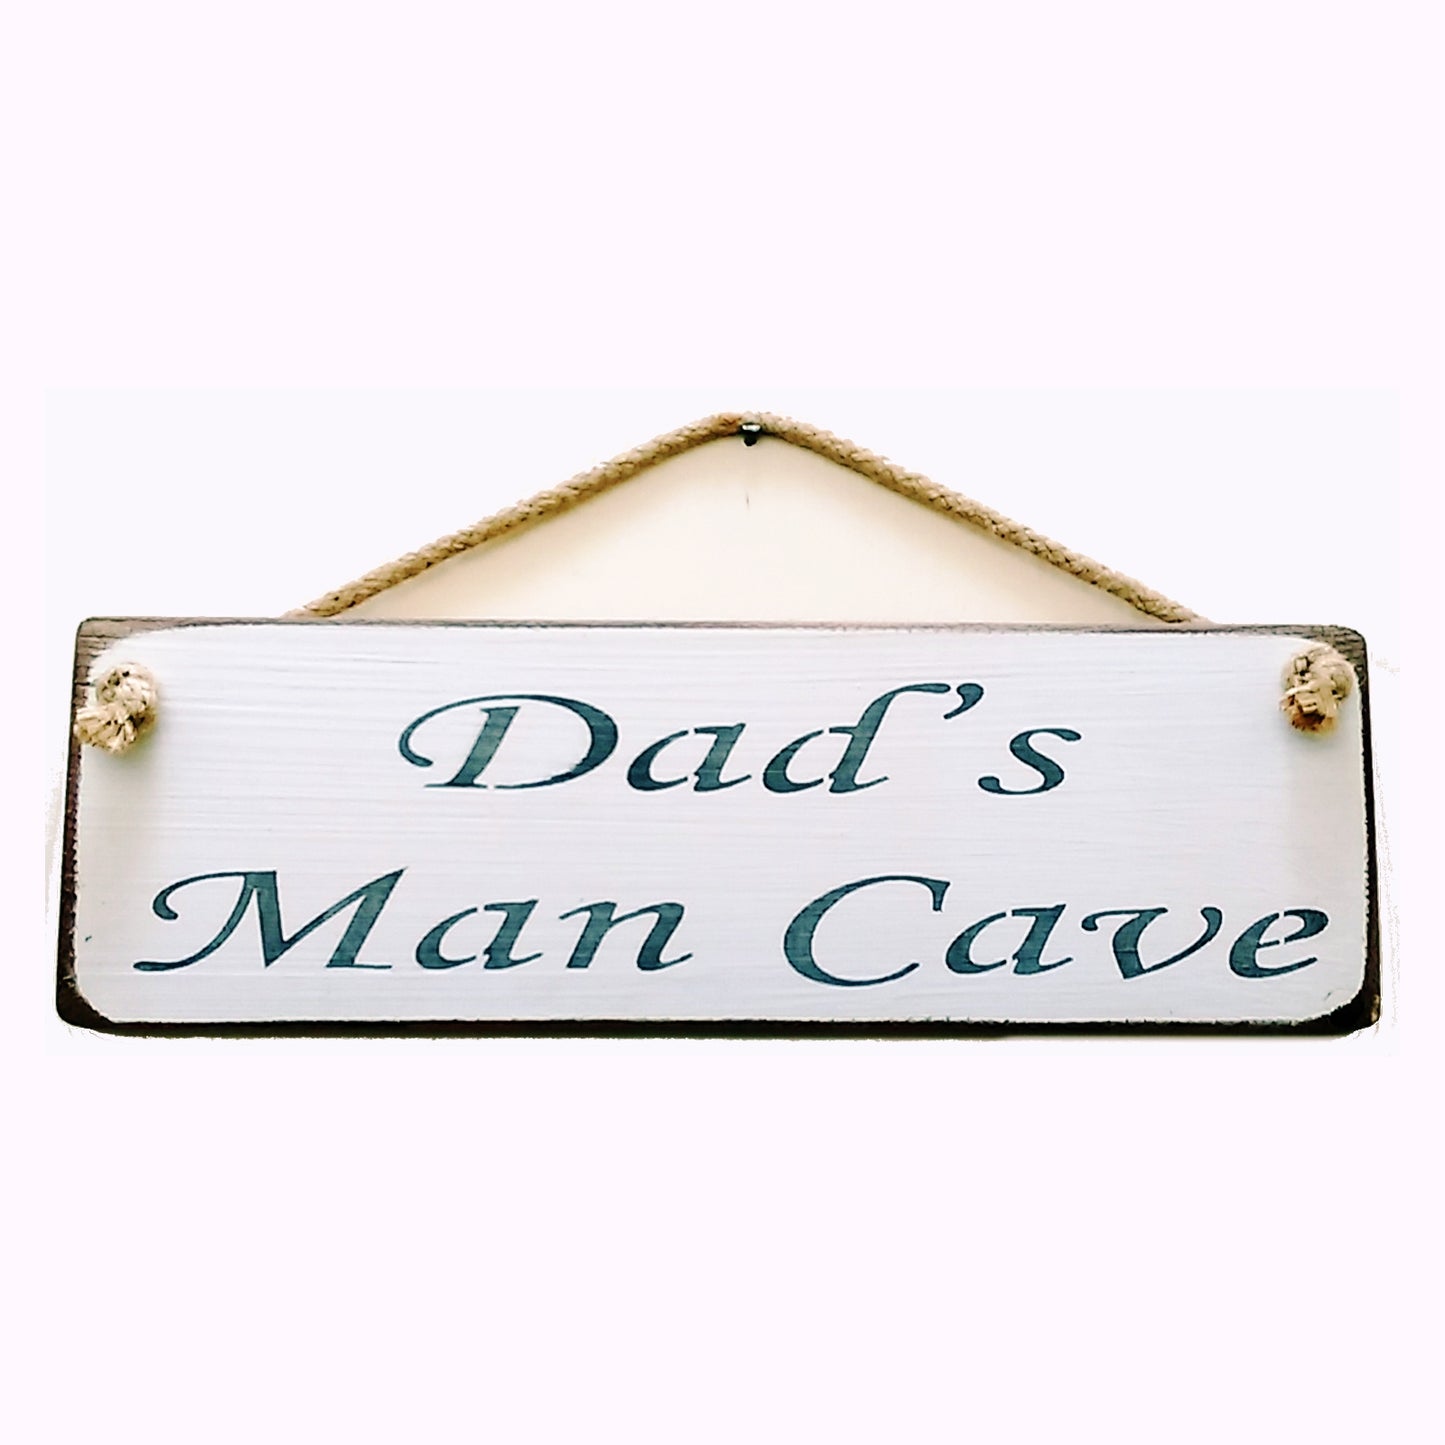 Dad's Man Cave - Vintage shabby chic Wooden Sign